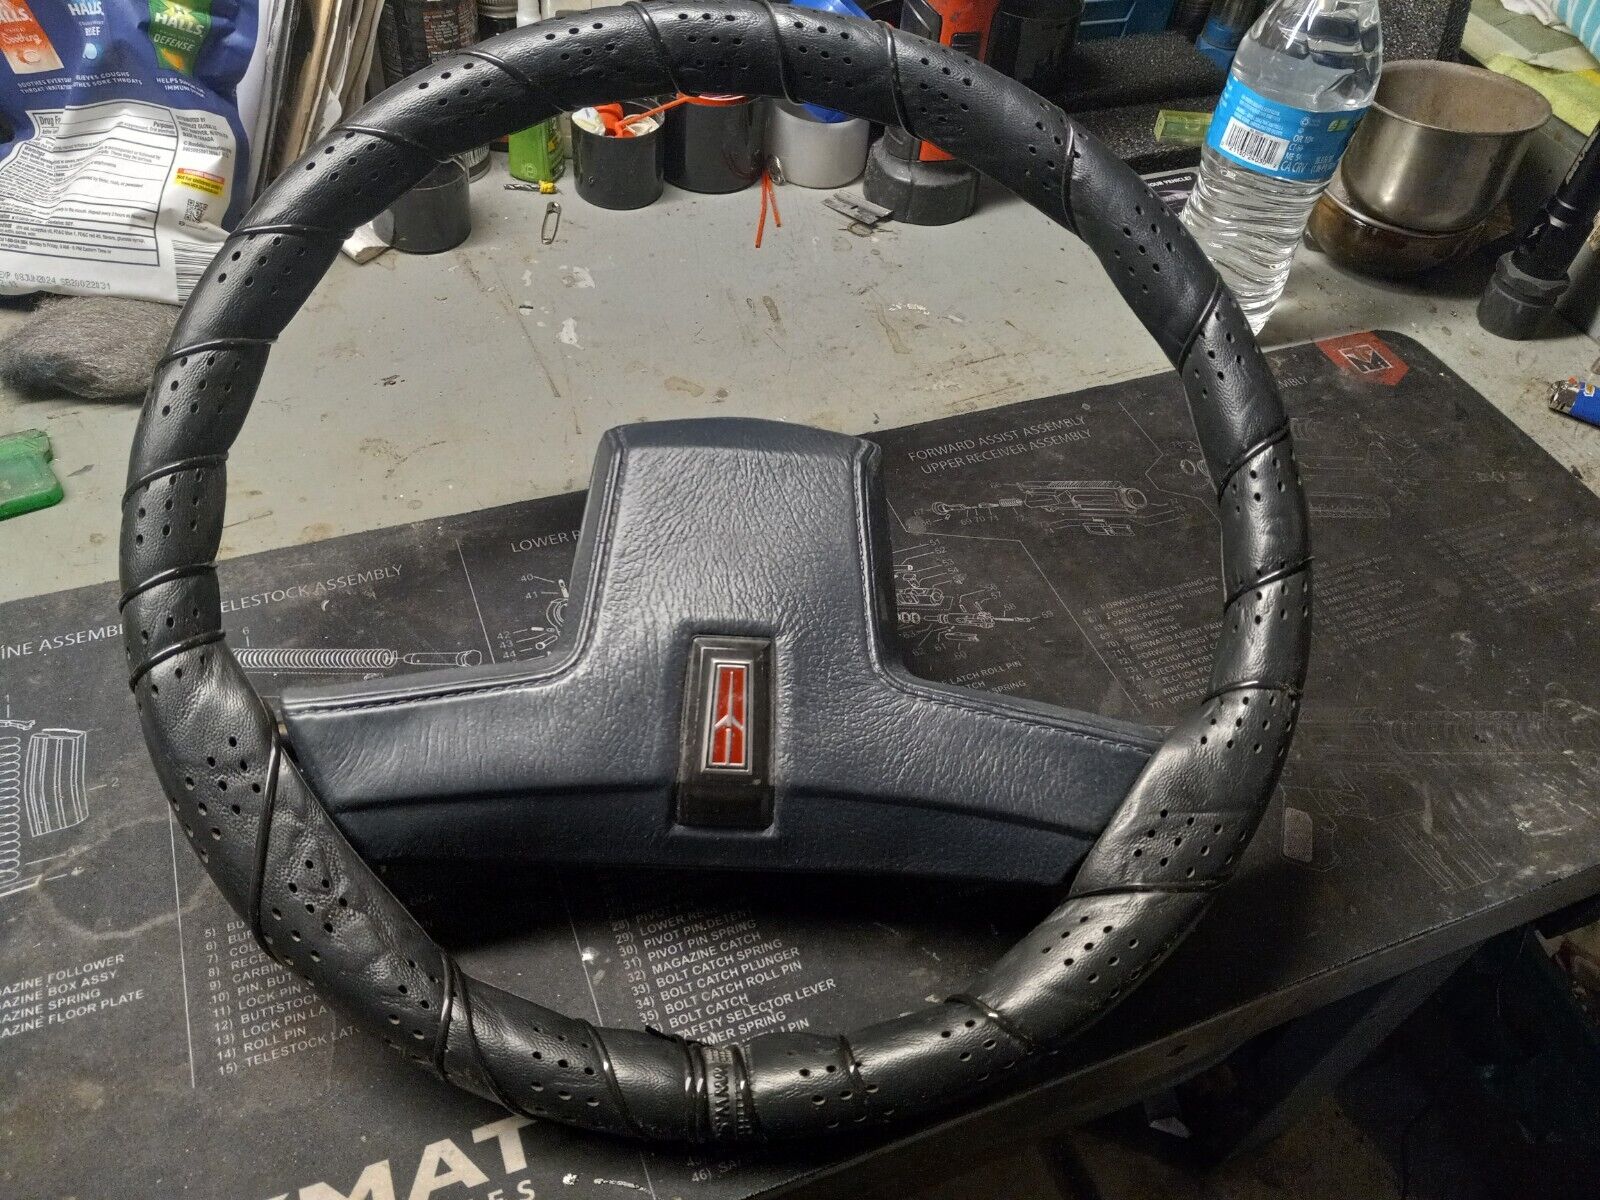 84 Olds cutlass Supreme Steering Wheel with Leather Wrap